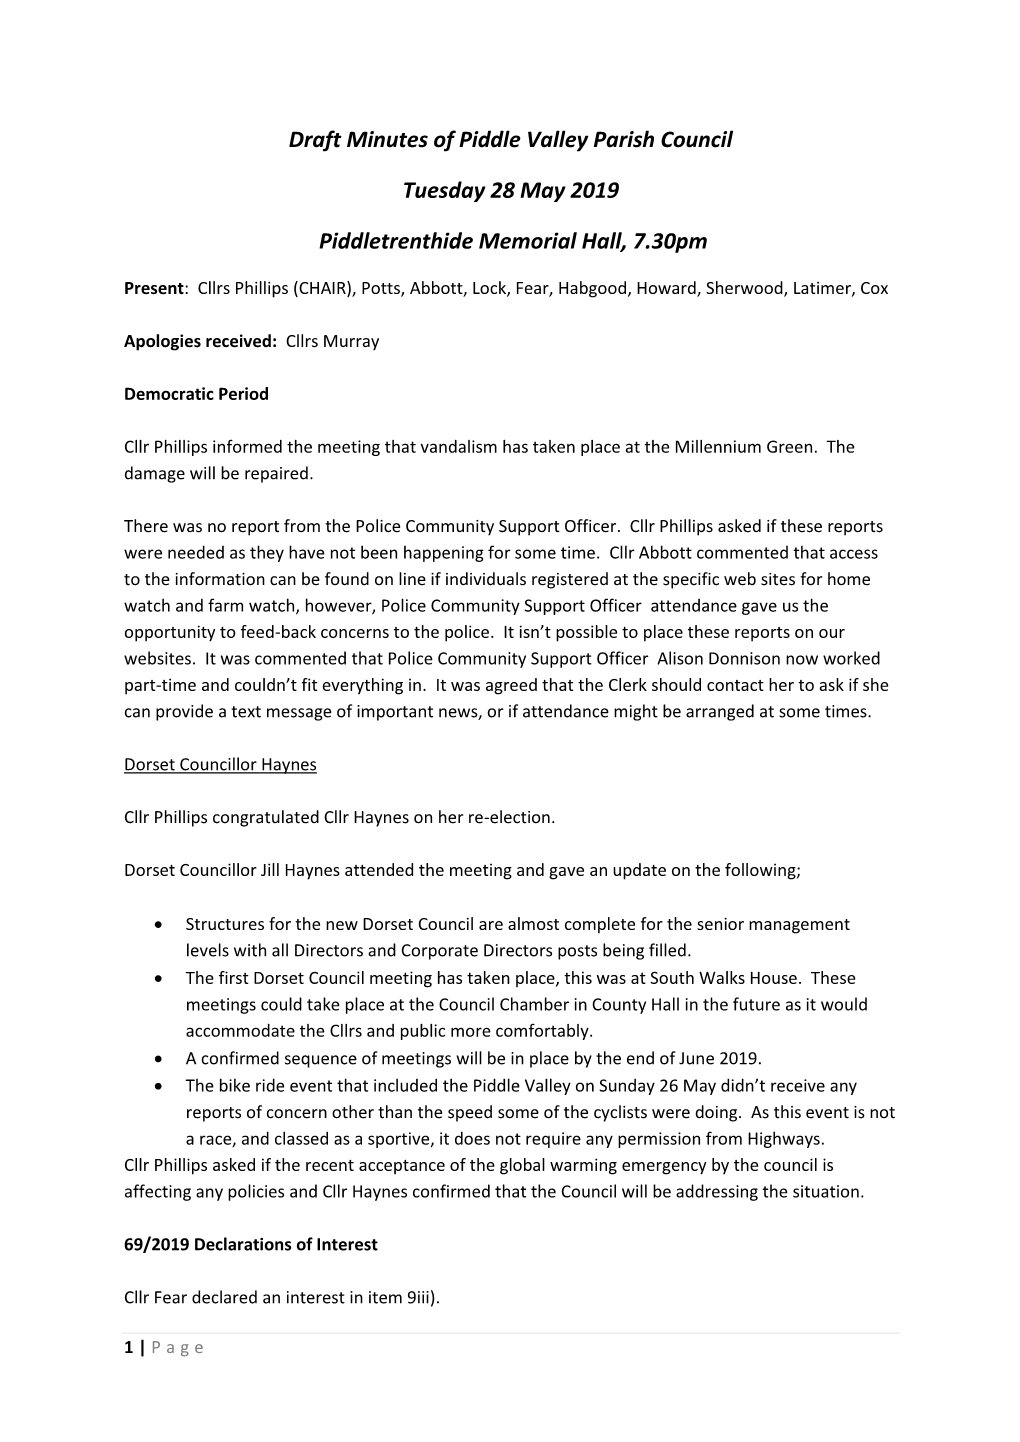 Draft Minutes of Piddle Valley Parish Council Tuesday 28 May 2019